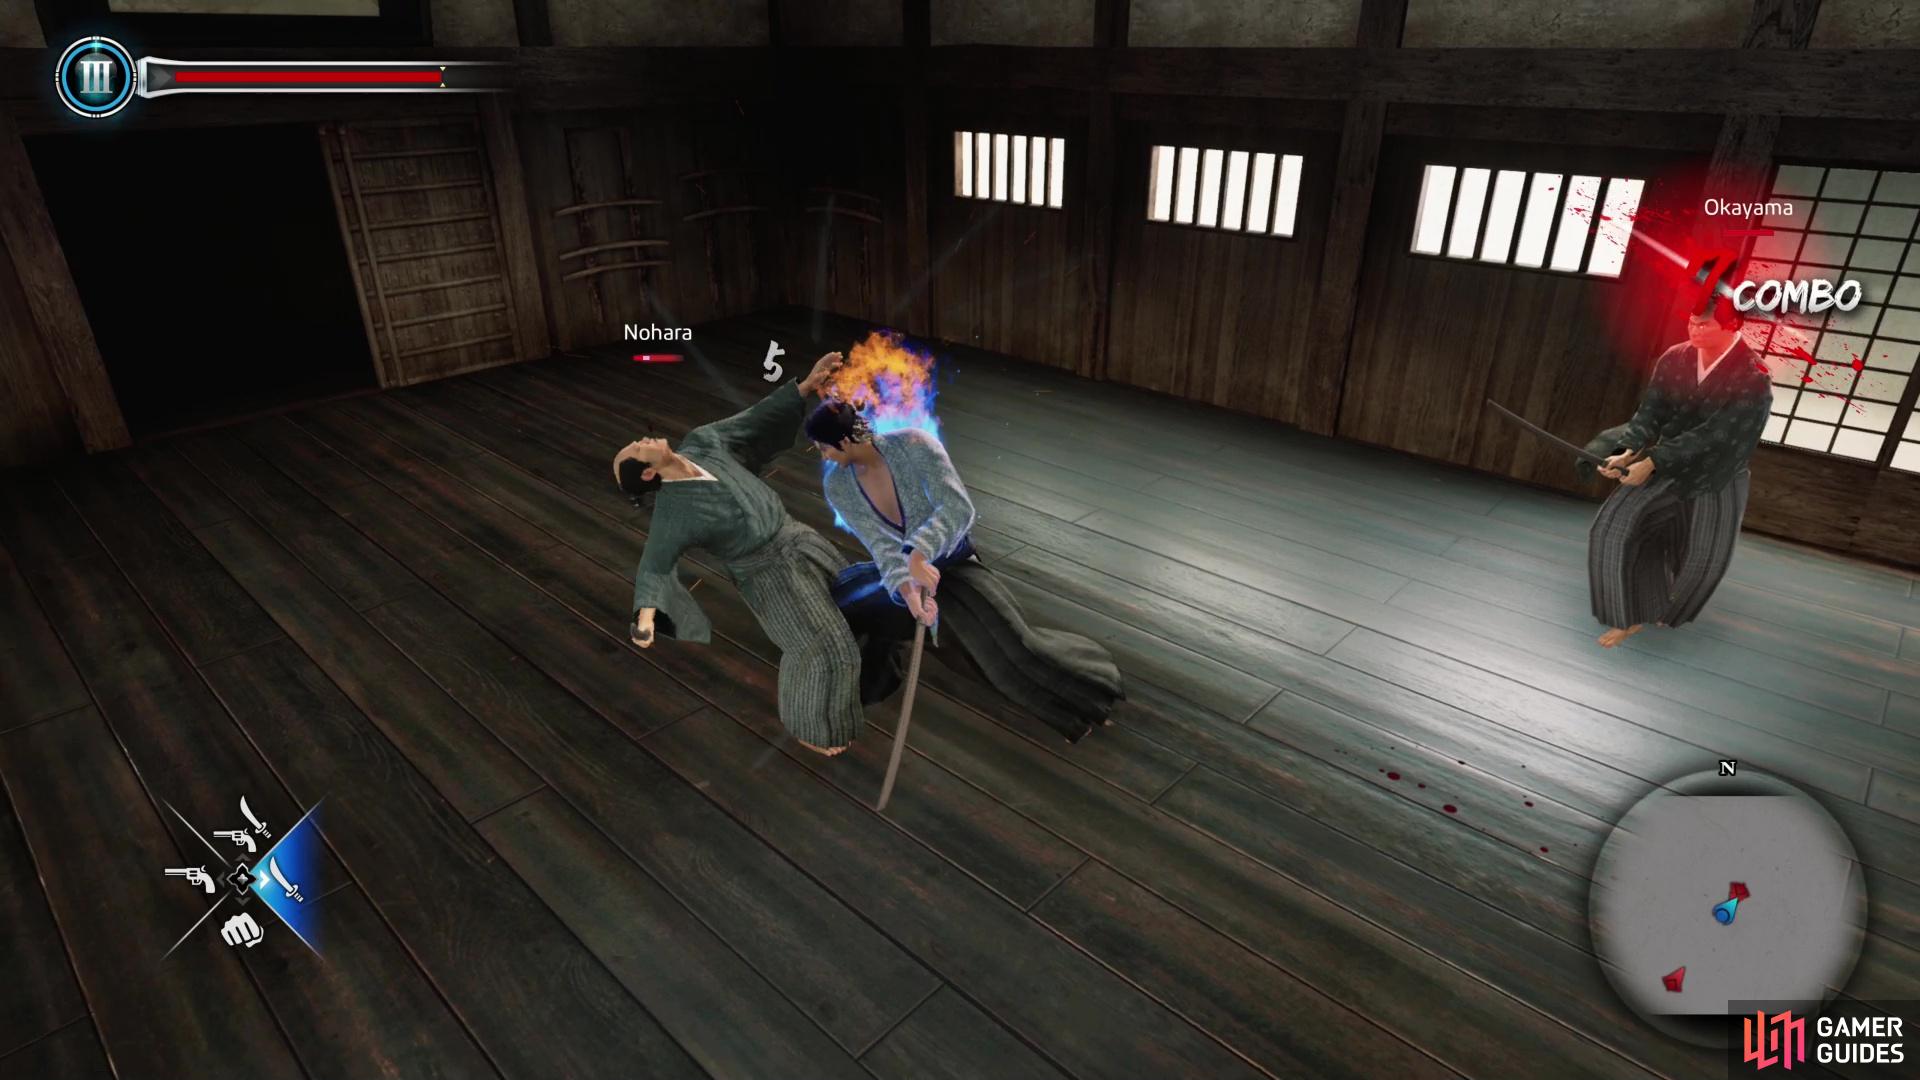 then progress through the start of Chapter 2 by defeating some students at a dojo,